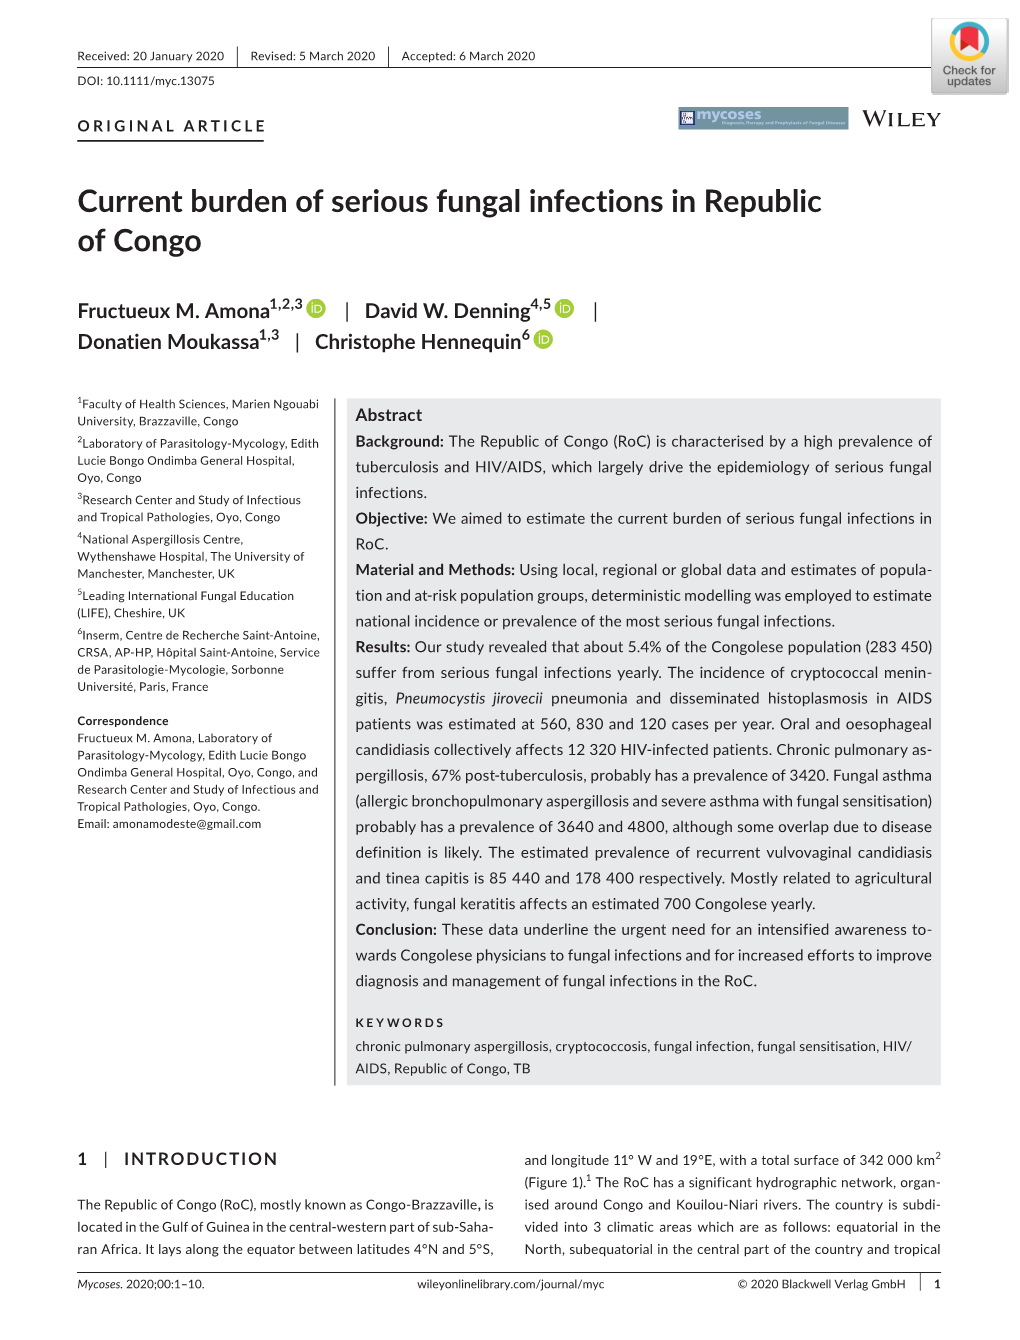 Current Burden of Serious Fungal Infections in Republic of Congo